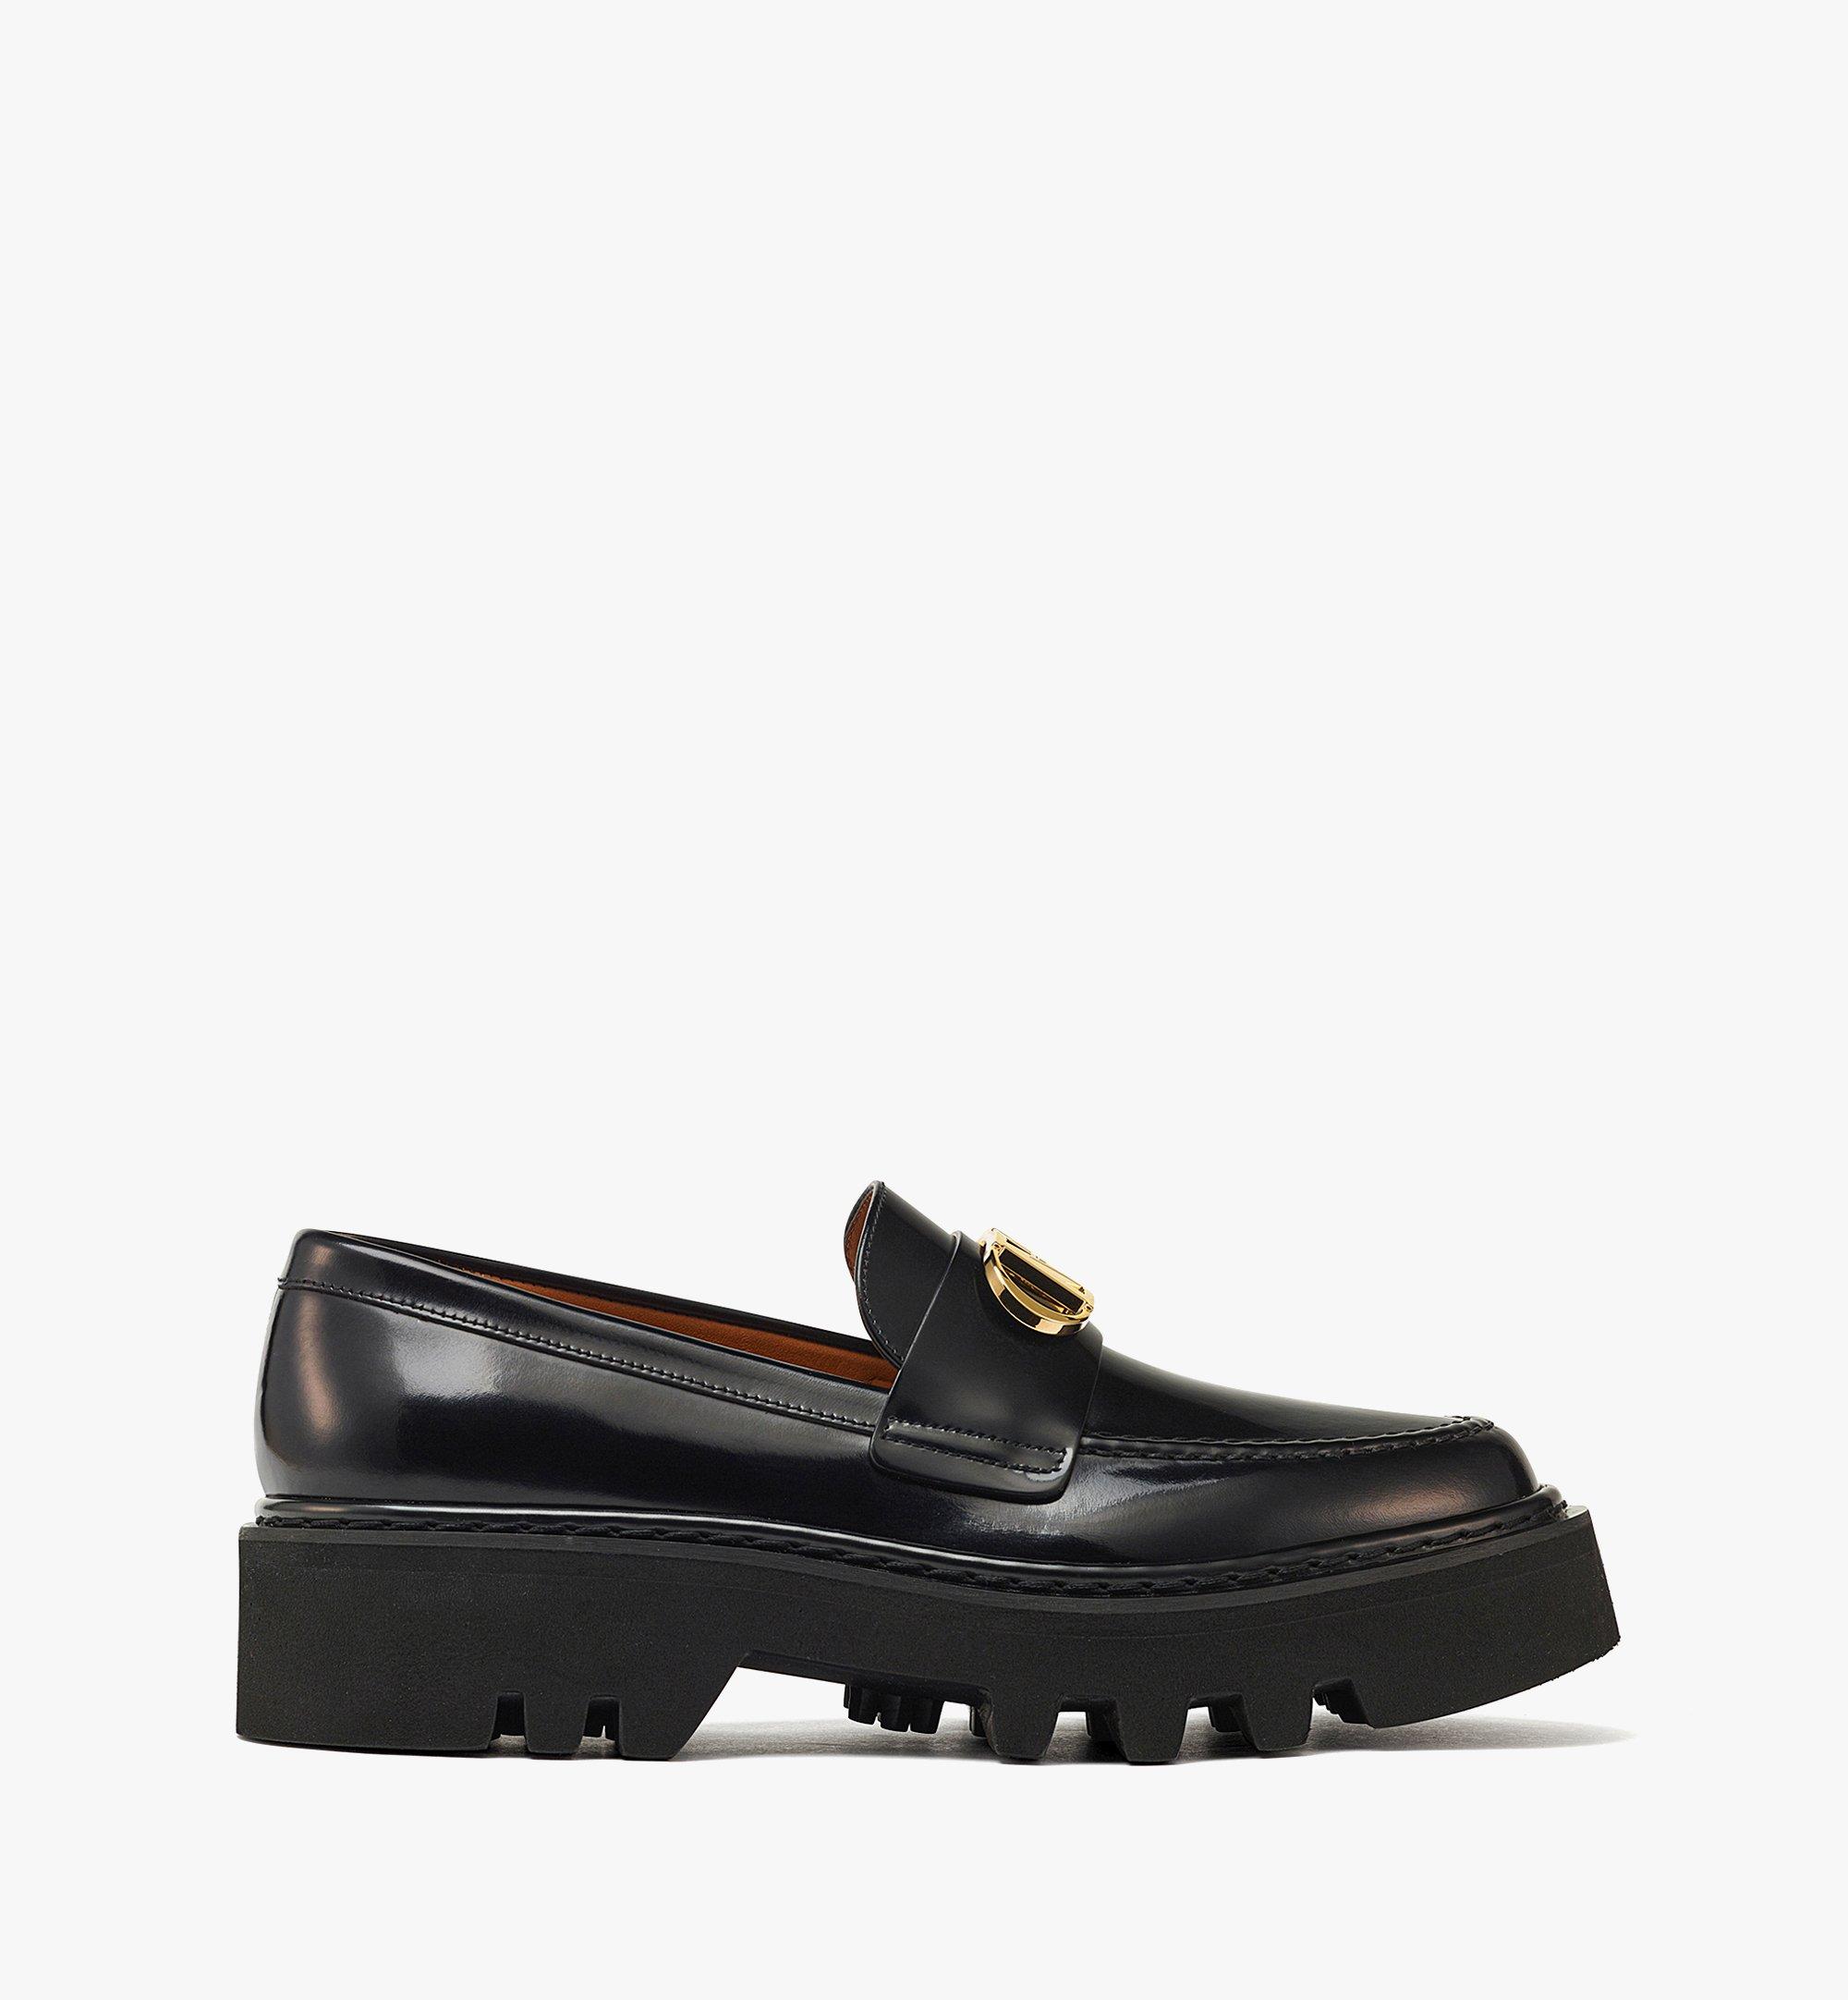 MCM Women’s Mode Travia Loafers in Brushed Calf Leather Black MESDSLD01BK037 Alternate View 3